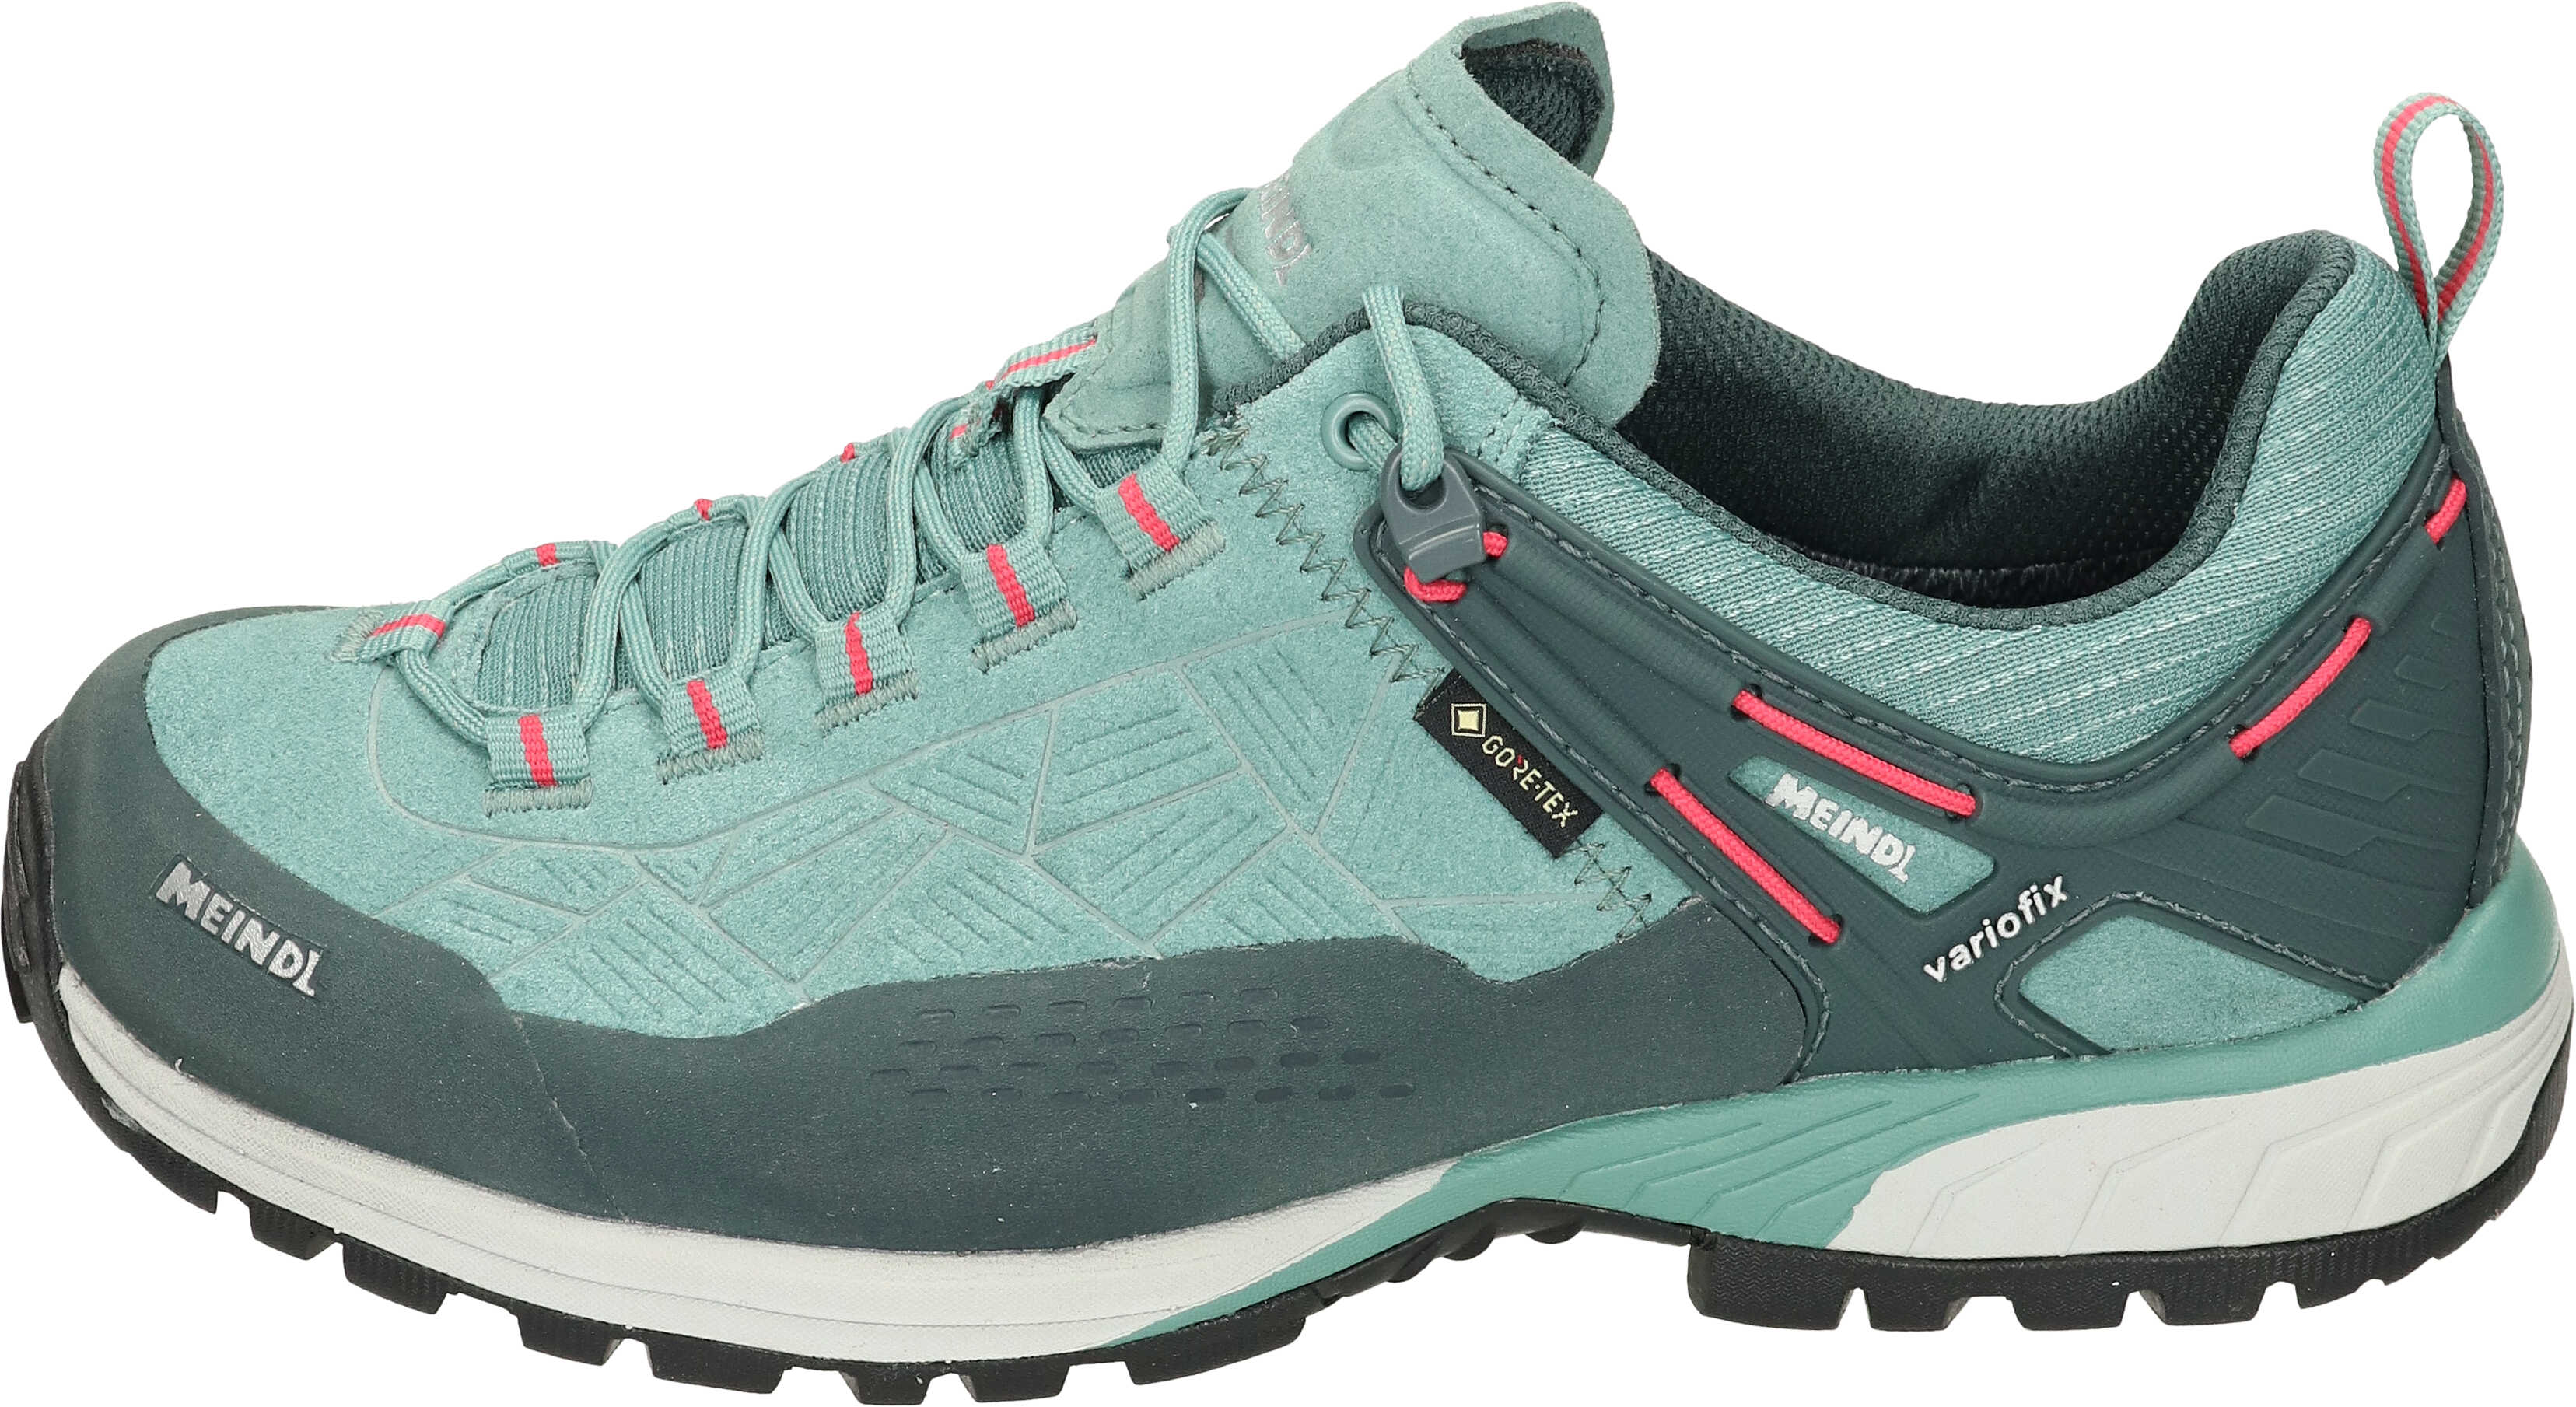 Top Trail Lady GTX Meindl Outdoor